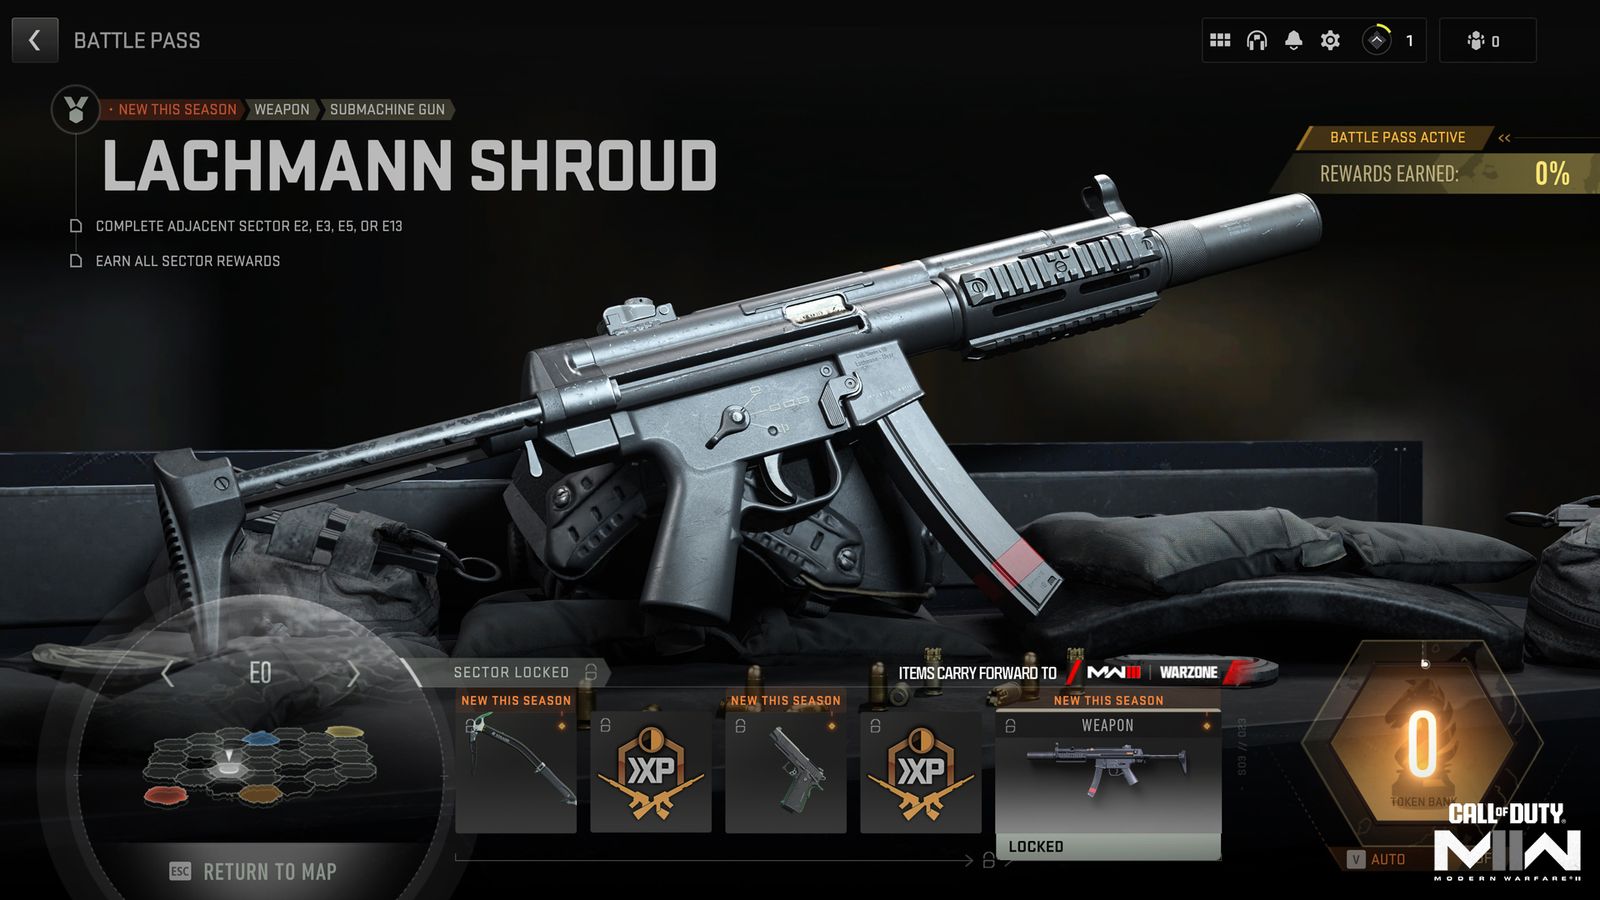 Lachmann Shroud SMG in MW2 and Warzone battle pass